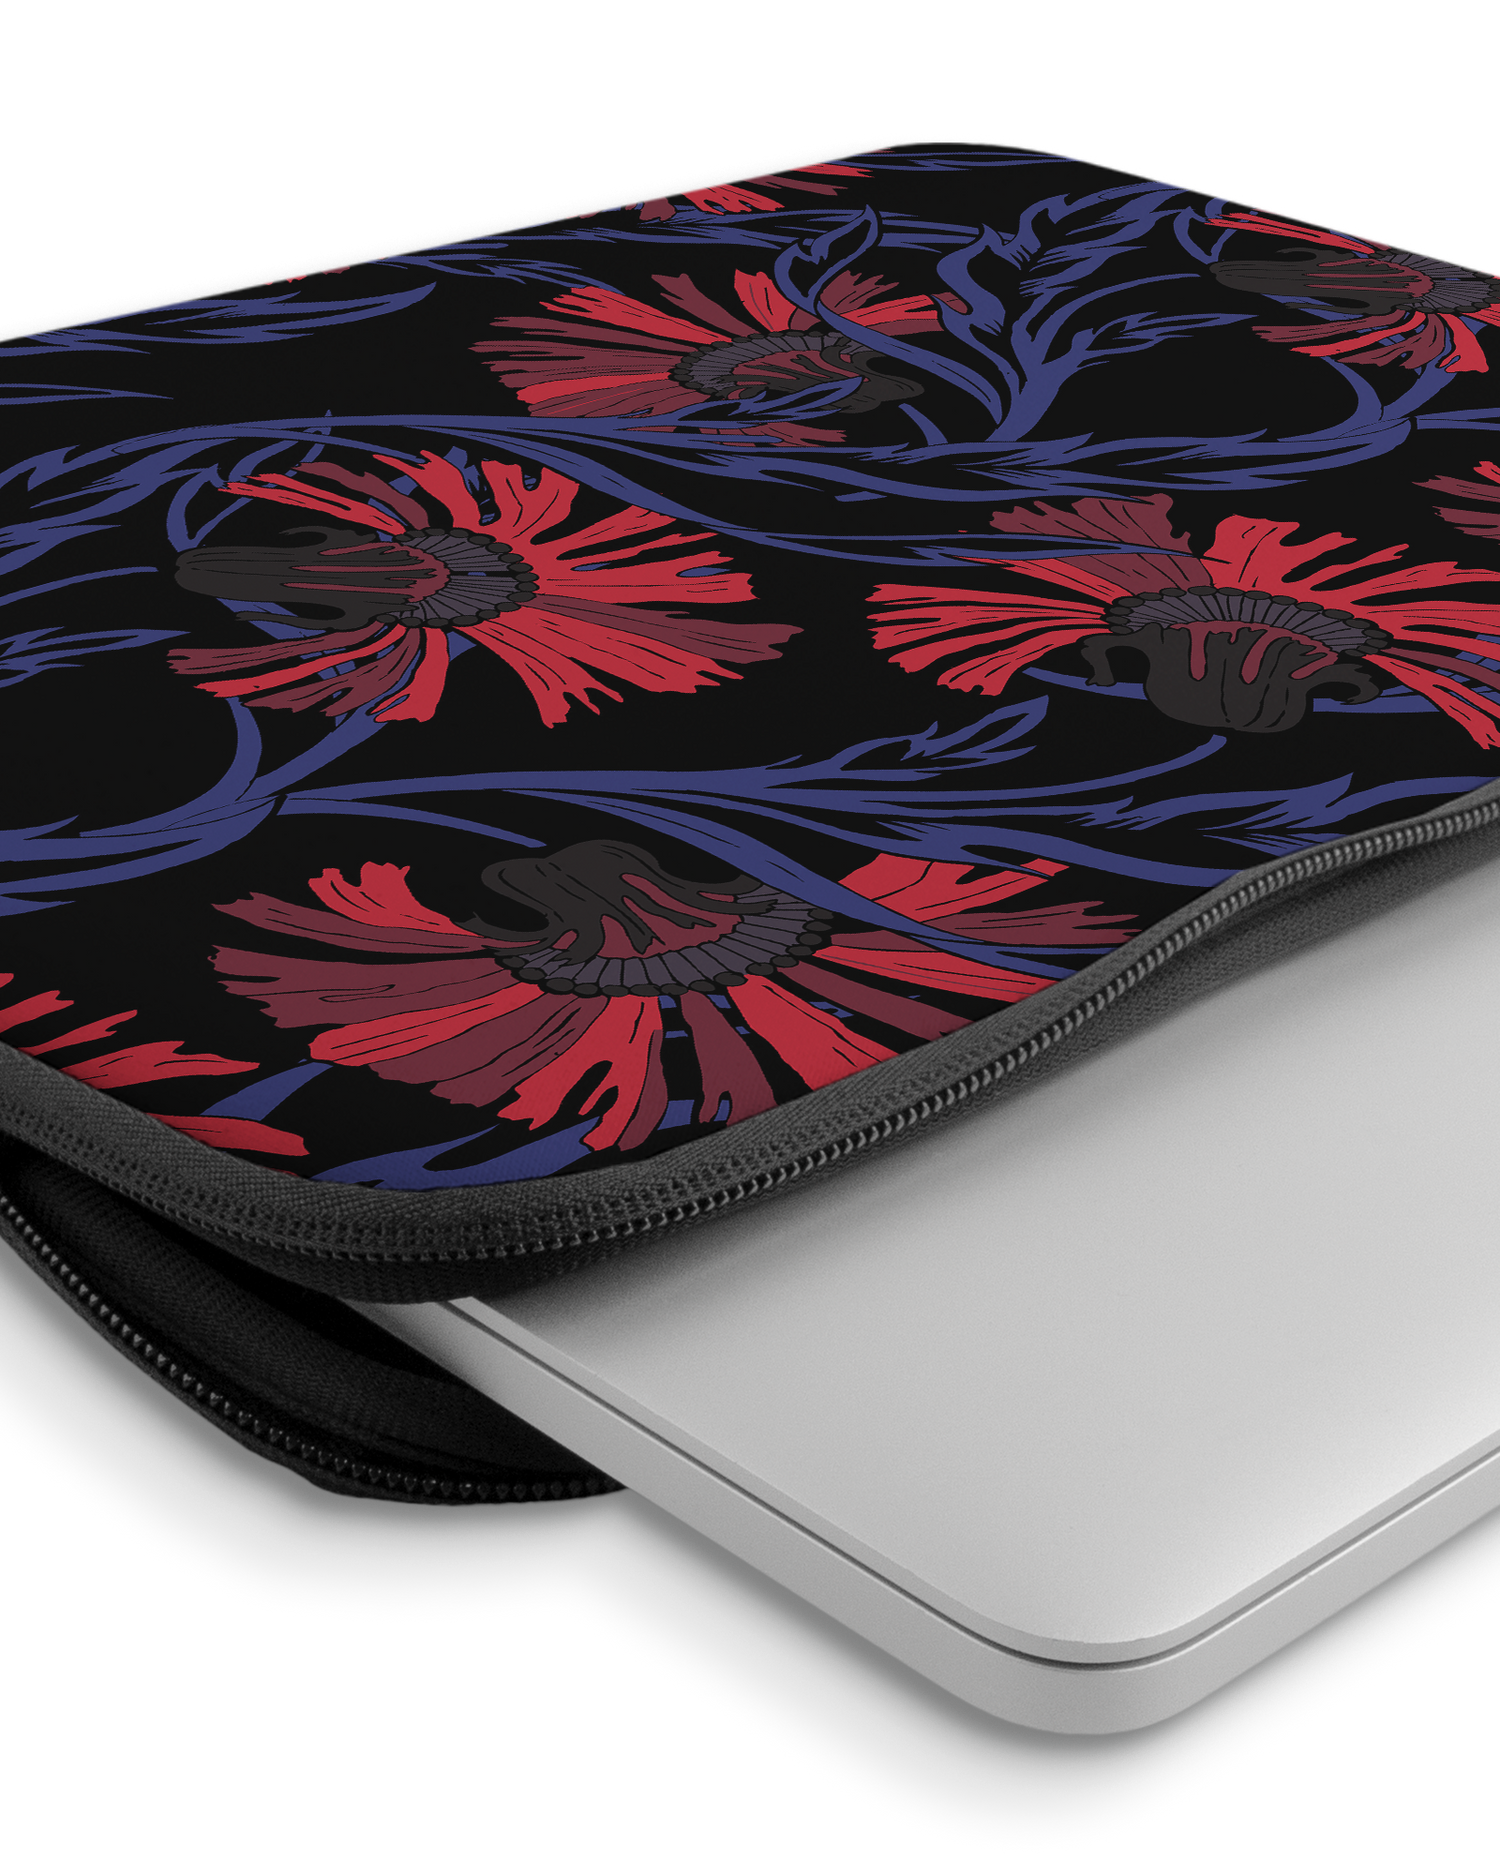 Midnight Floral Laptop Case 14-15 inch with device inside